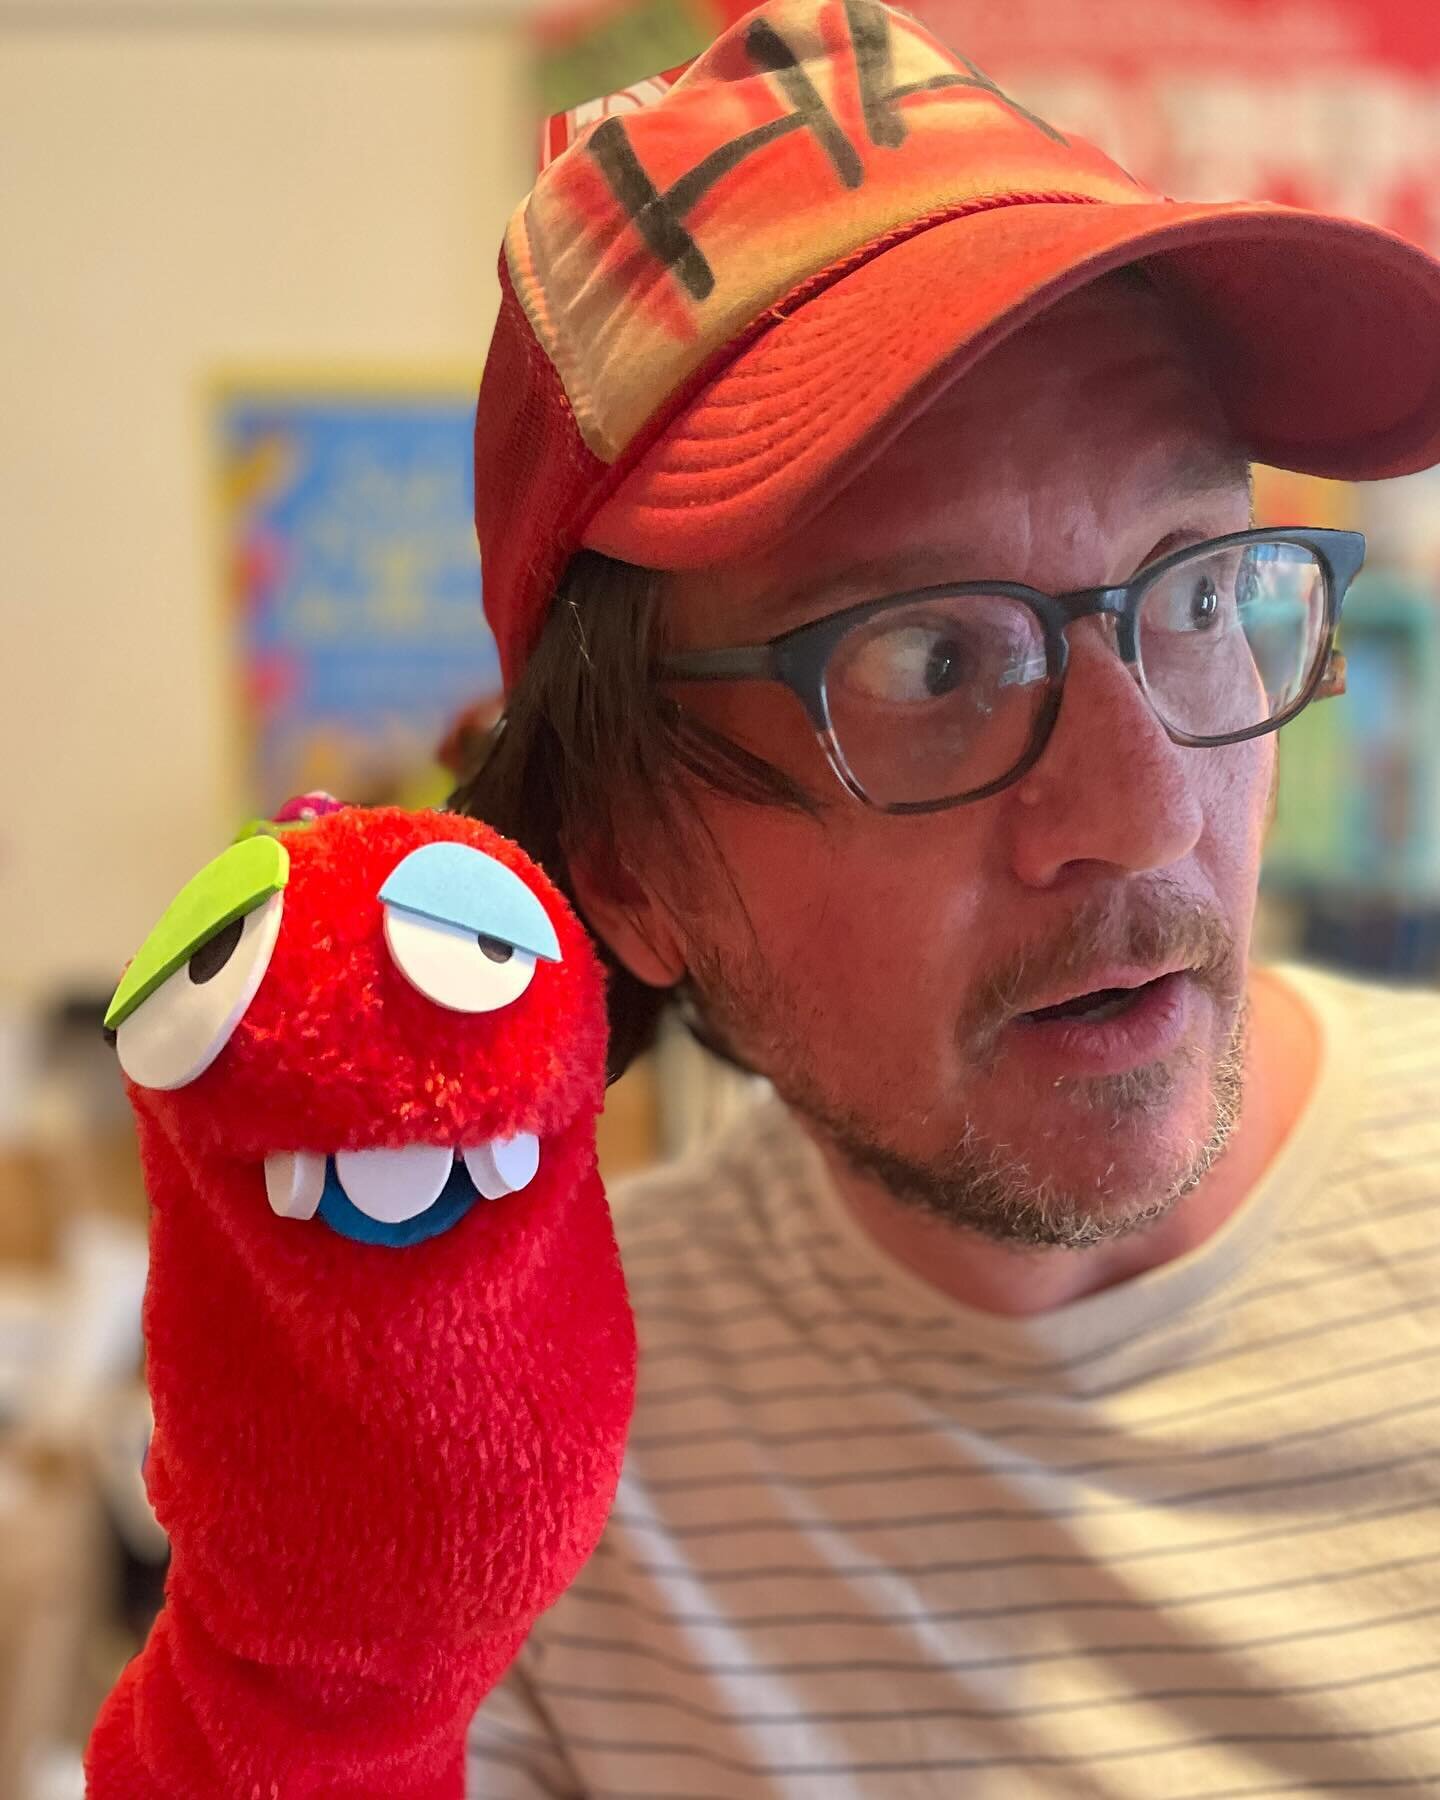 WORMIE WEEK wiggles forward with the introduction of TOMA-TONY the Red WORMIE! TOMA-TONY, like all red Wormies, loves to sing. Tony specializes in songs about sandwiches (he&rsquo;s currently working on a concept album about rye bread). 

You can get